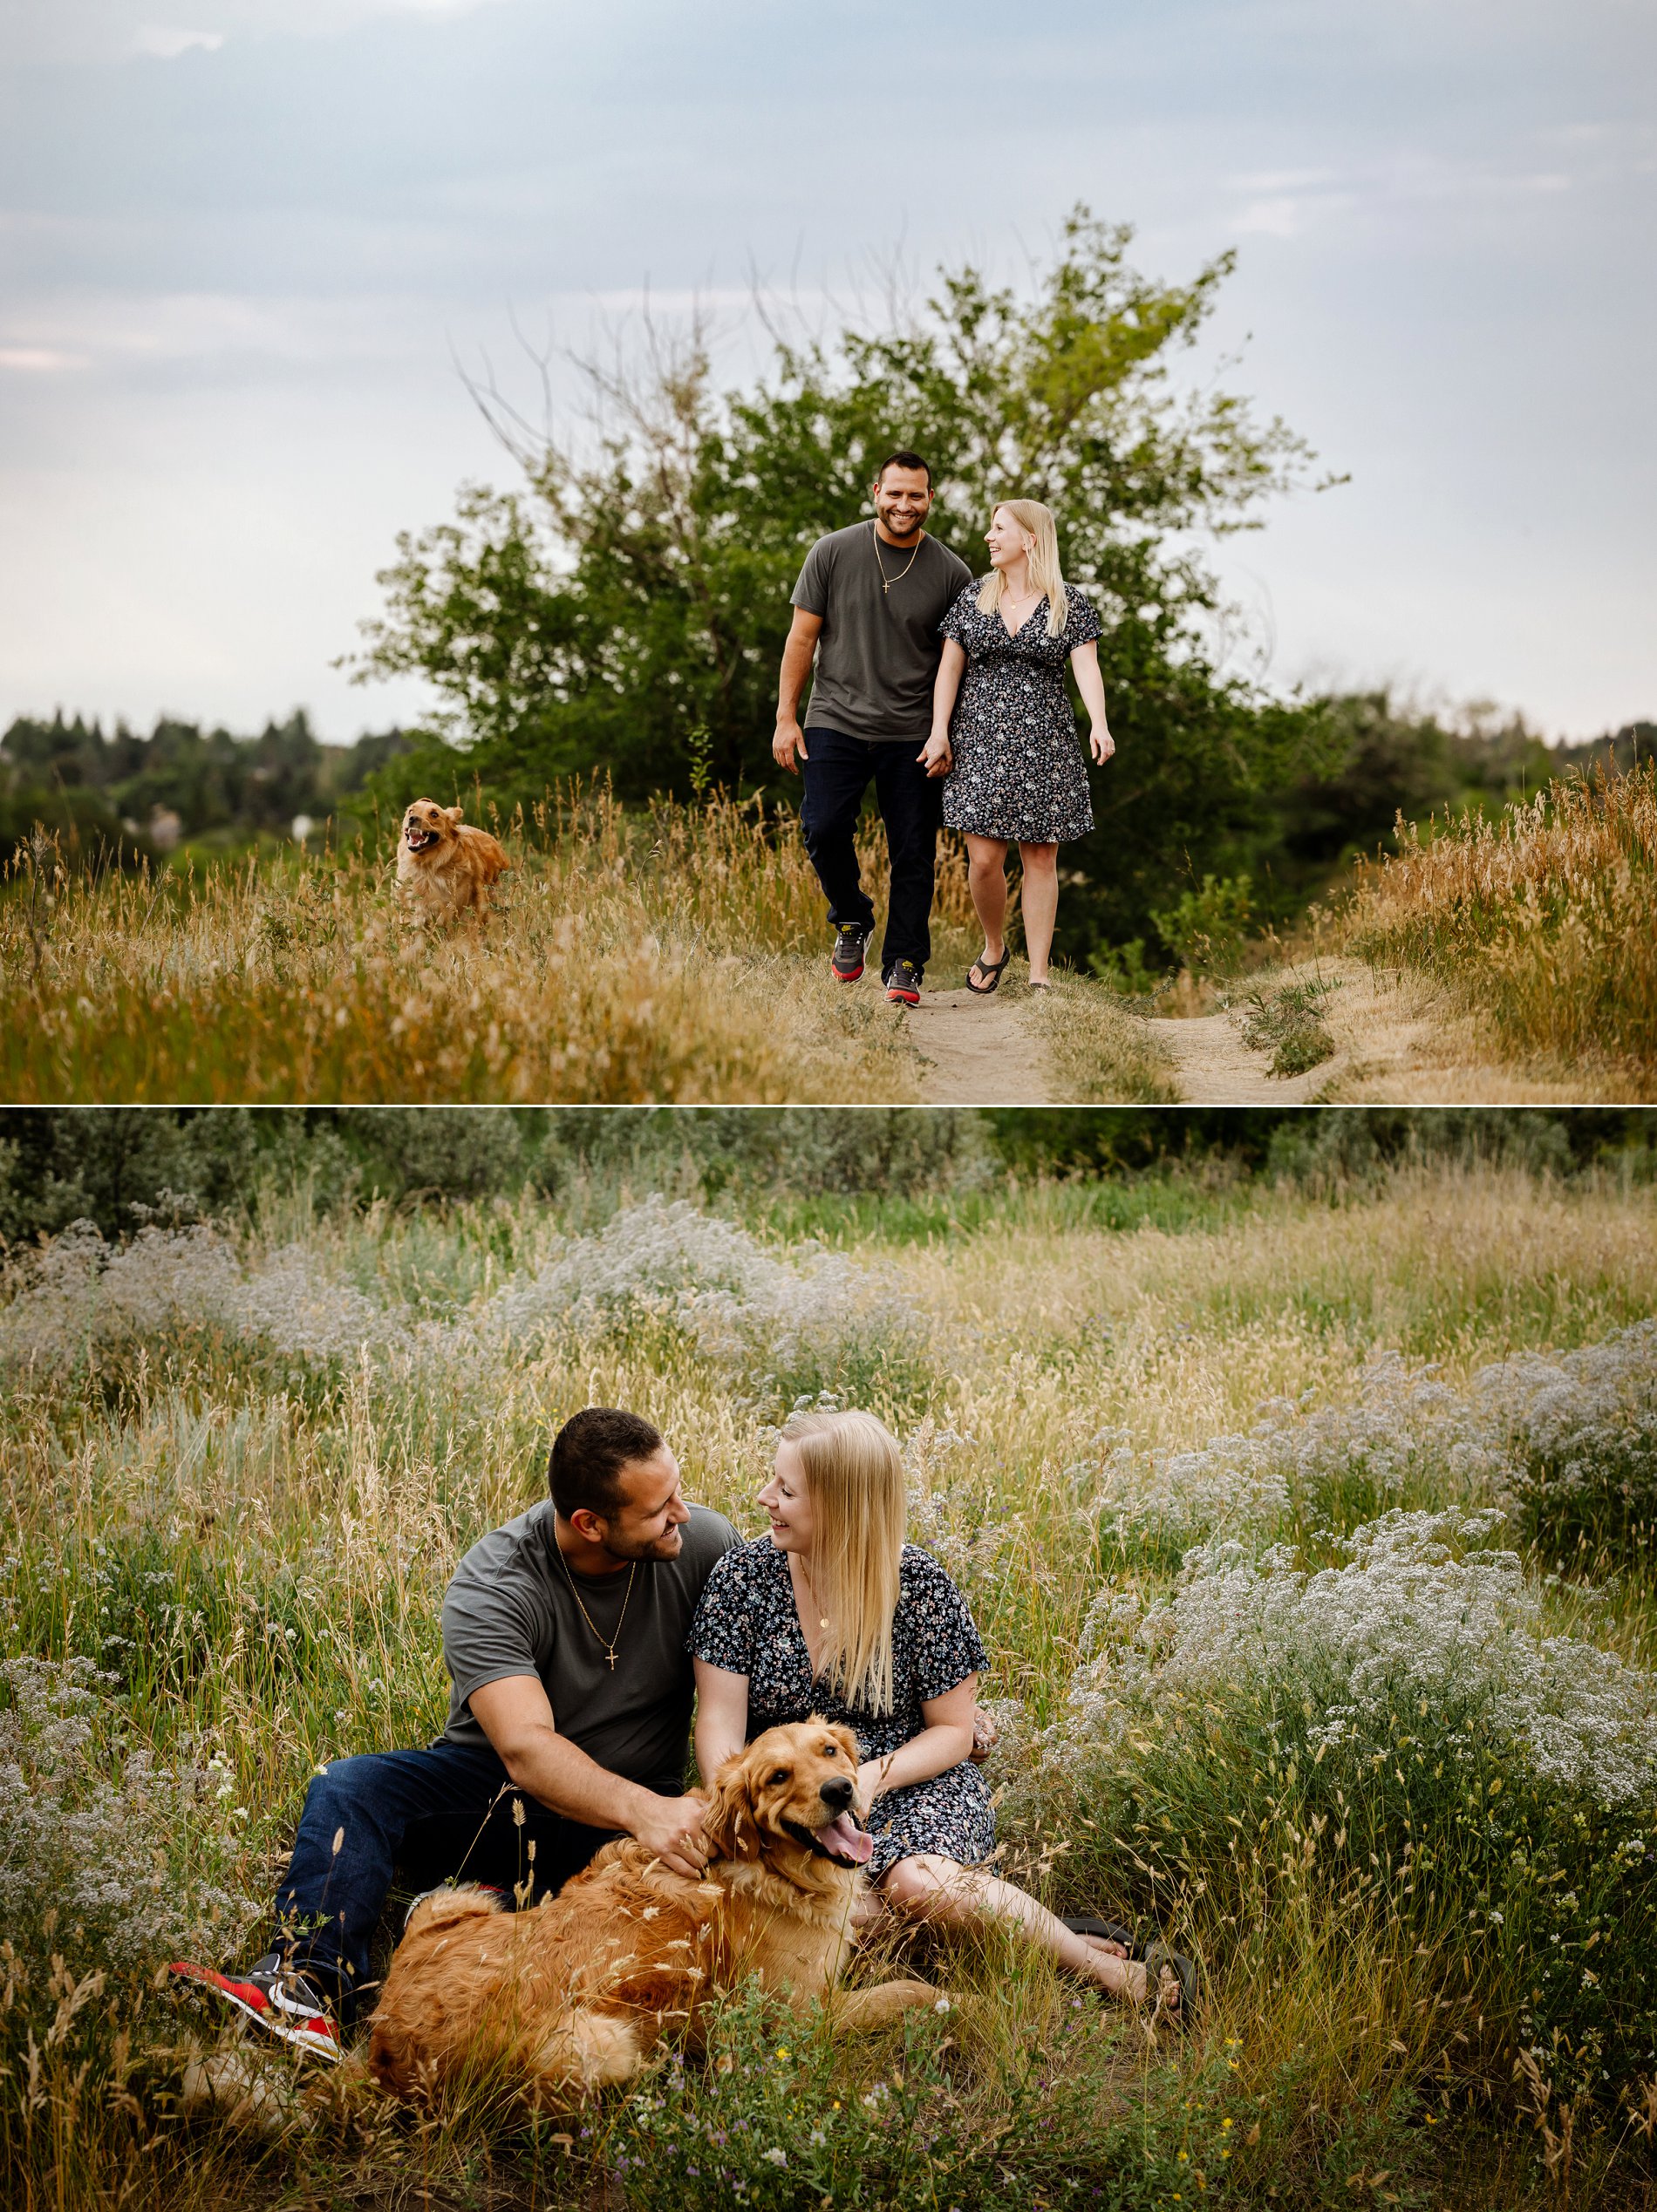 A couple walks down a path and sits with their dog in some flowers during their engagement session.